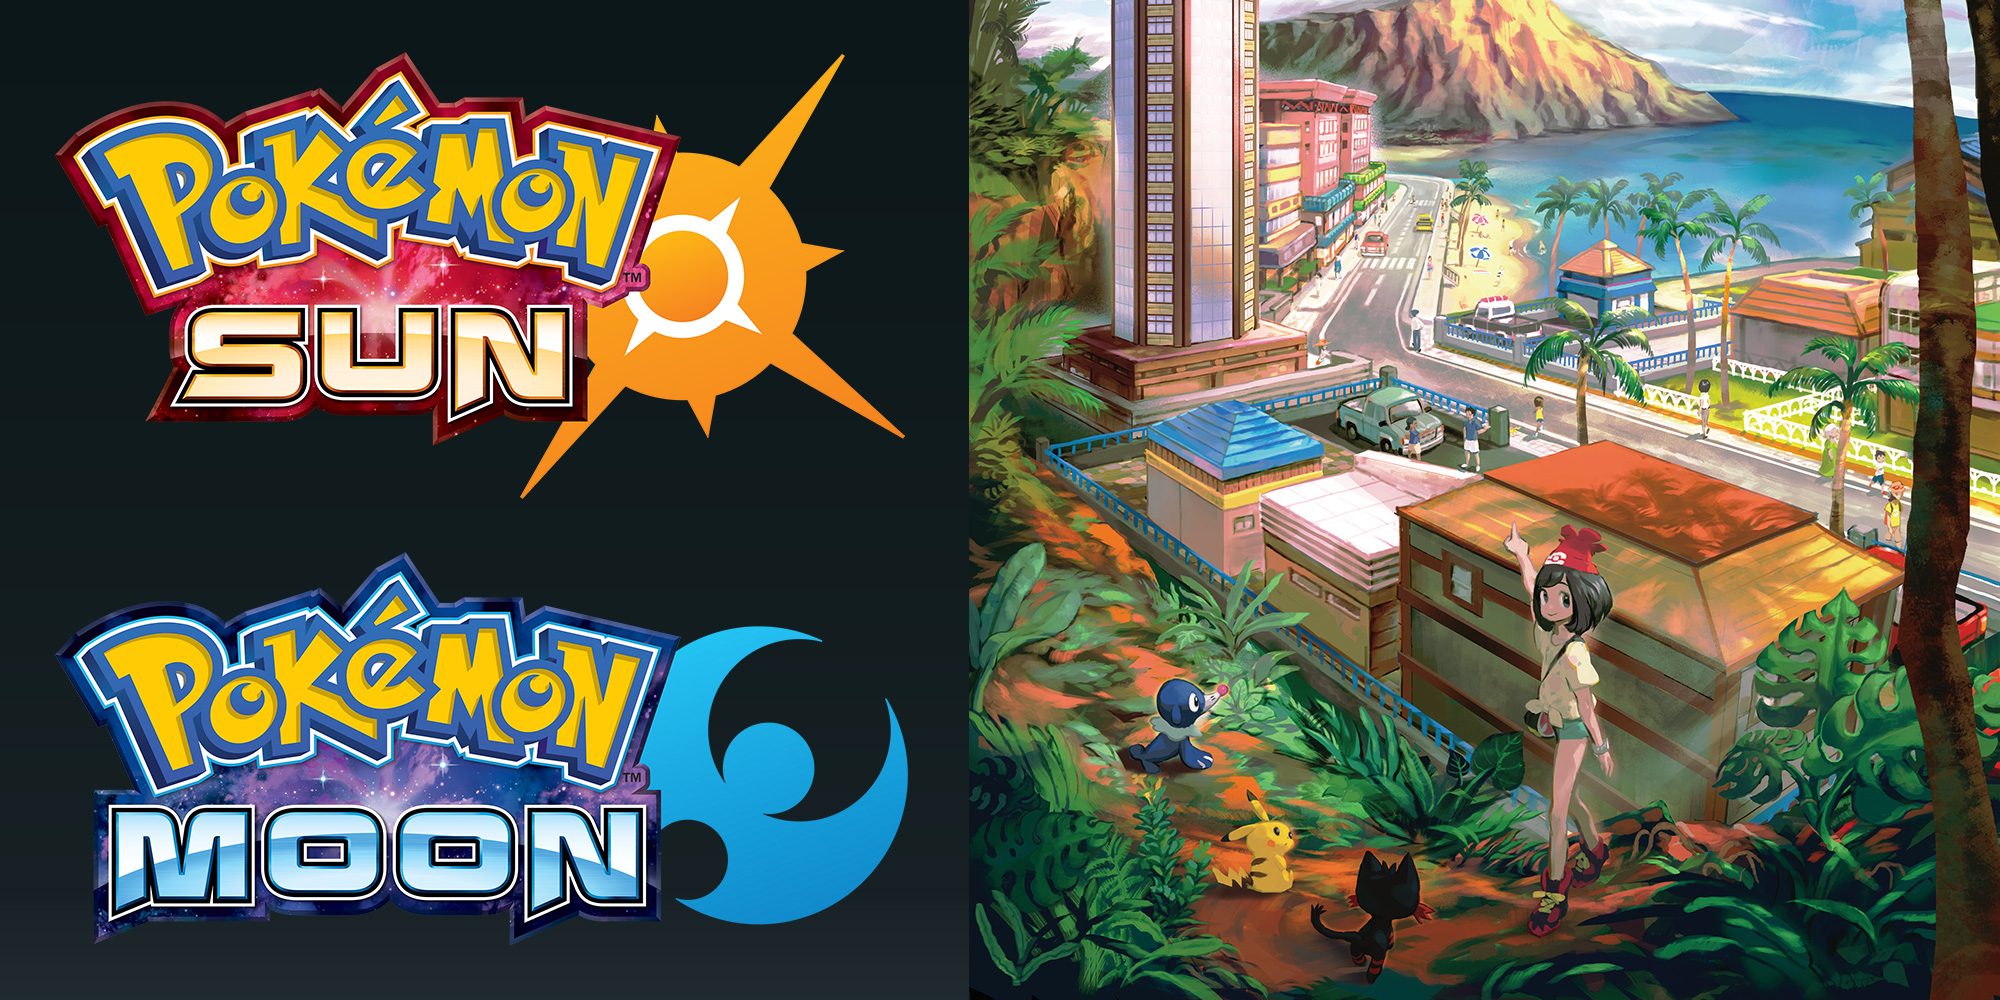 NEW UPDATE] POKEMON GAME WITH MOON , Z-MOVES, ALOLA REGION & ULTRA BEASTS!  